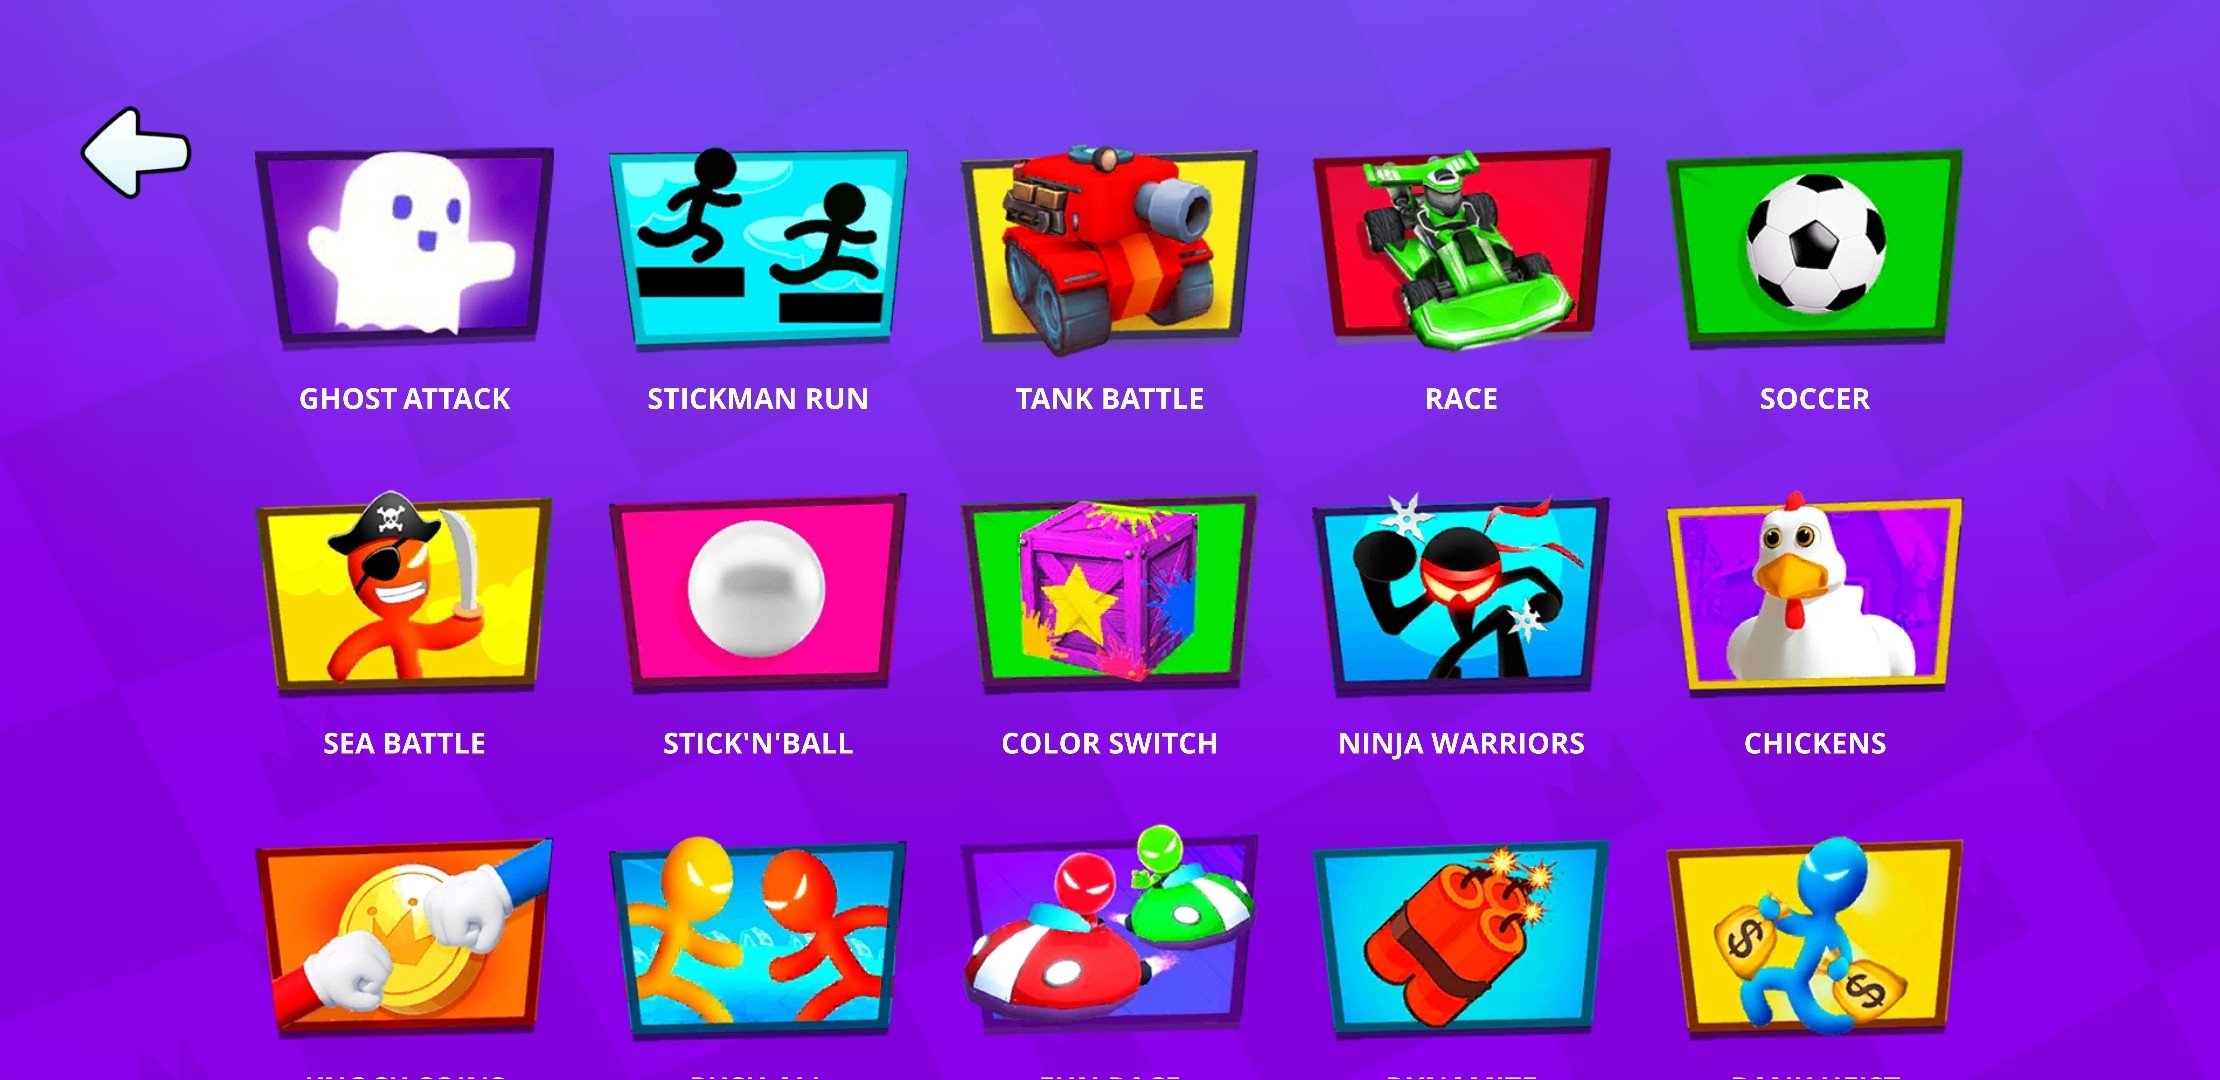 Stickman Party 2 3 4 MiniGames Mod apk download - Playmax Game Studio  Download Stickman Party (MOD, Unlimited Coins) 2.3.8.3 free for Android.